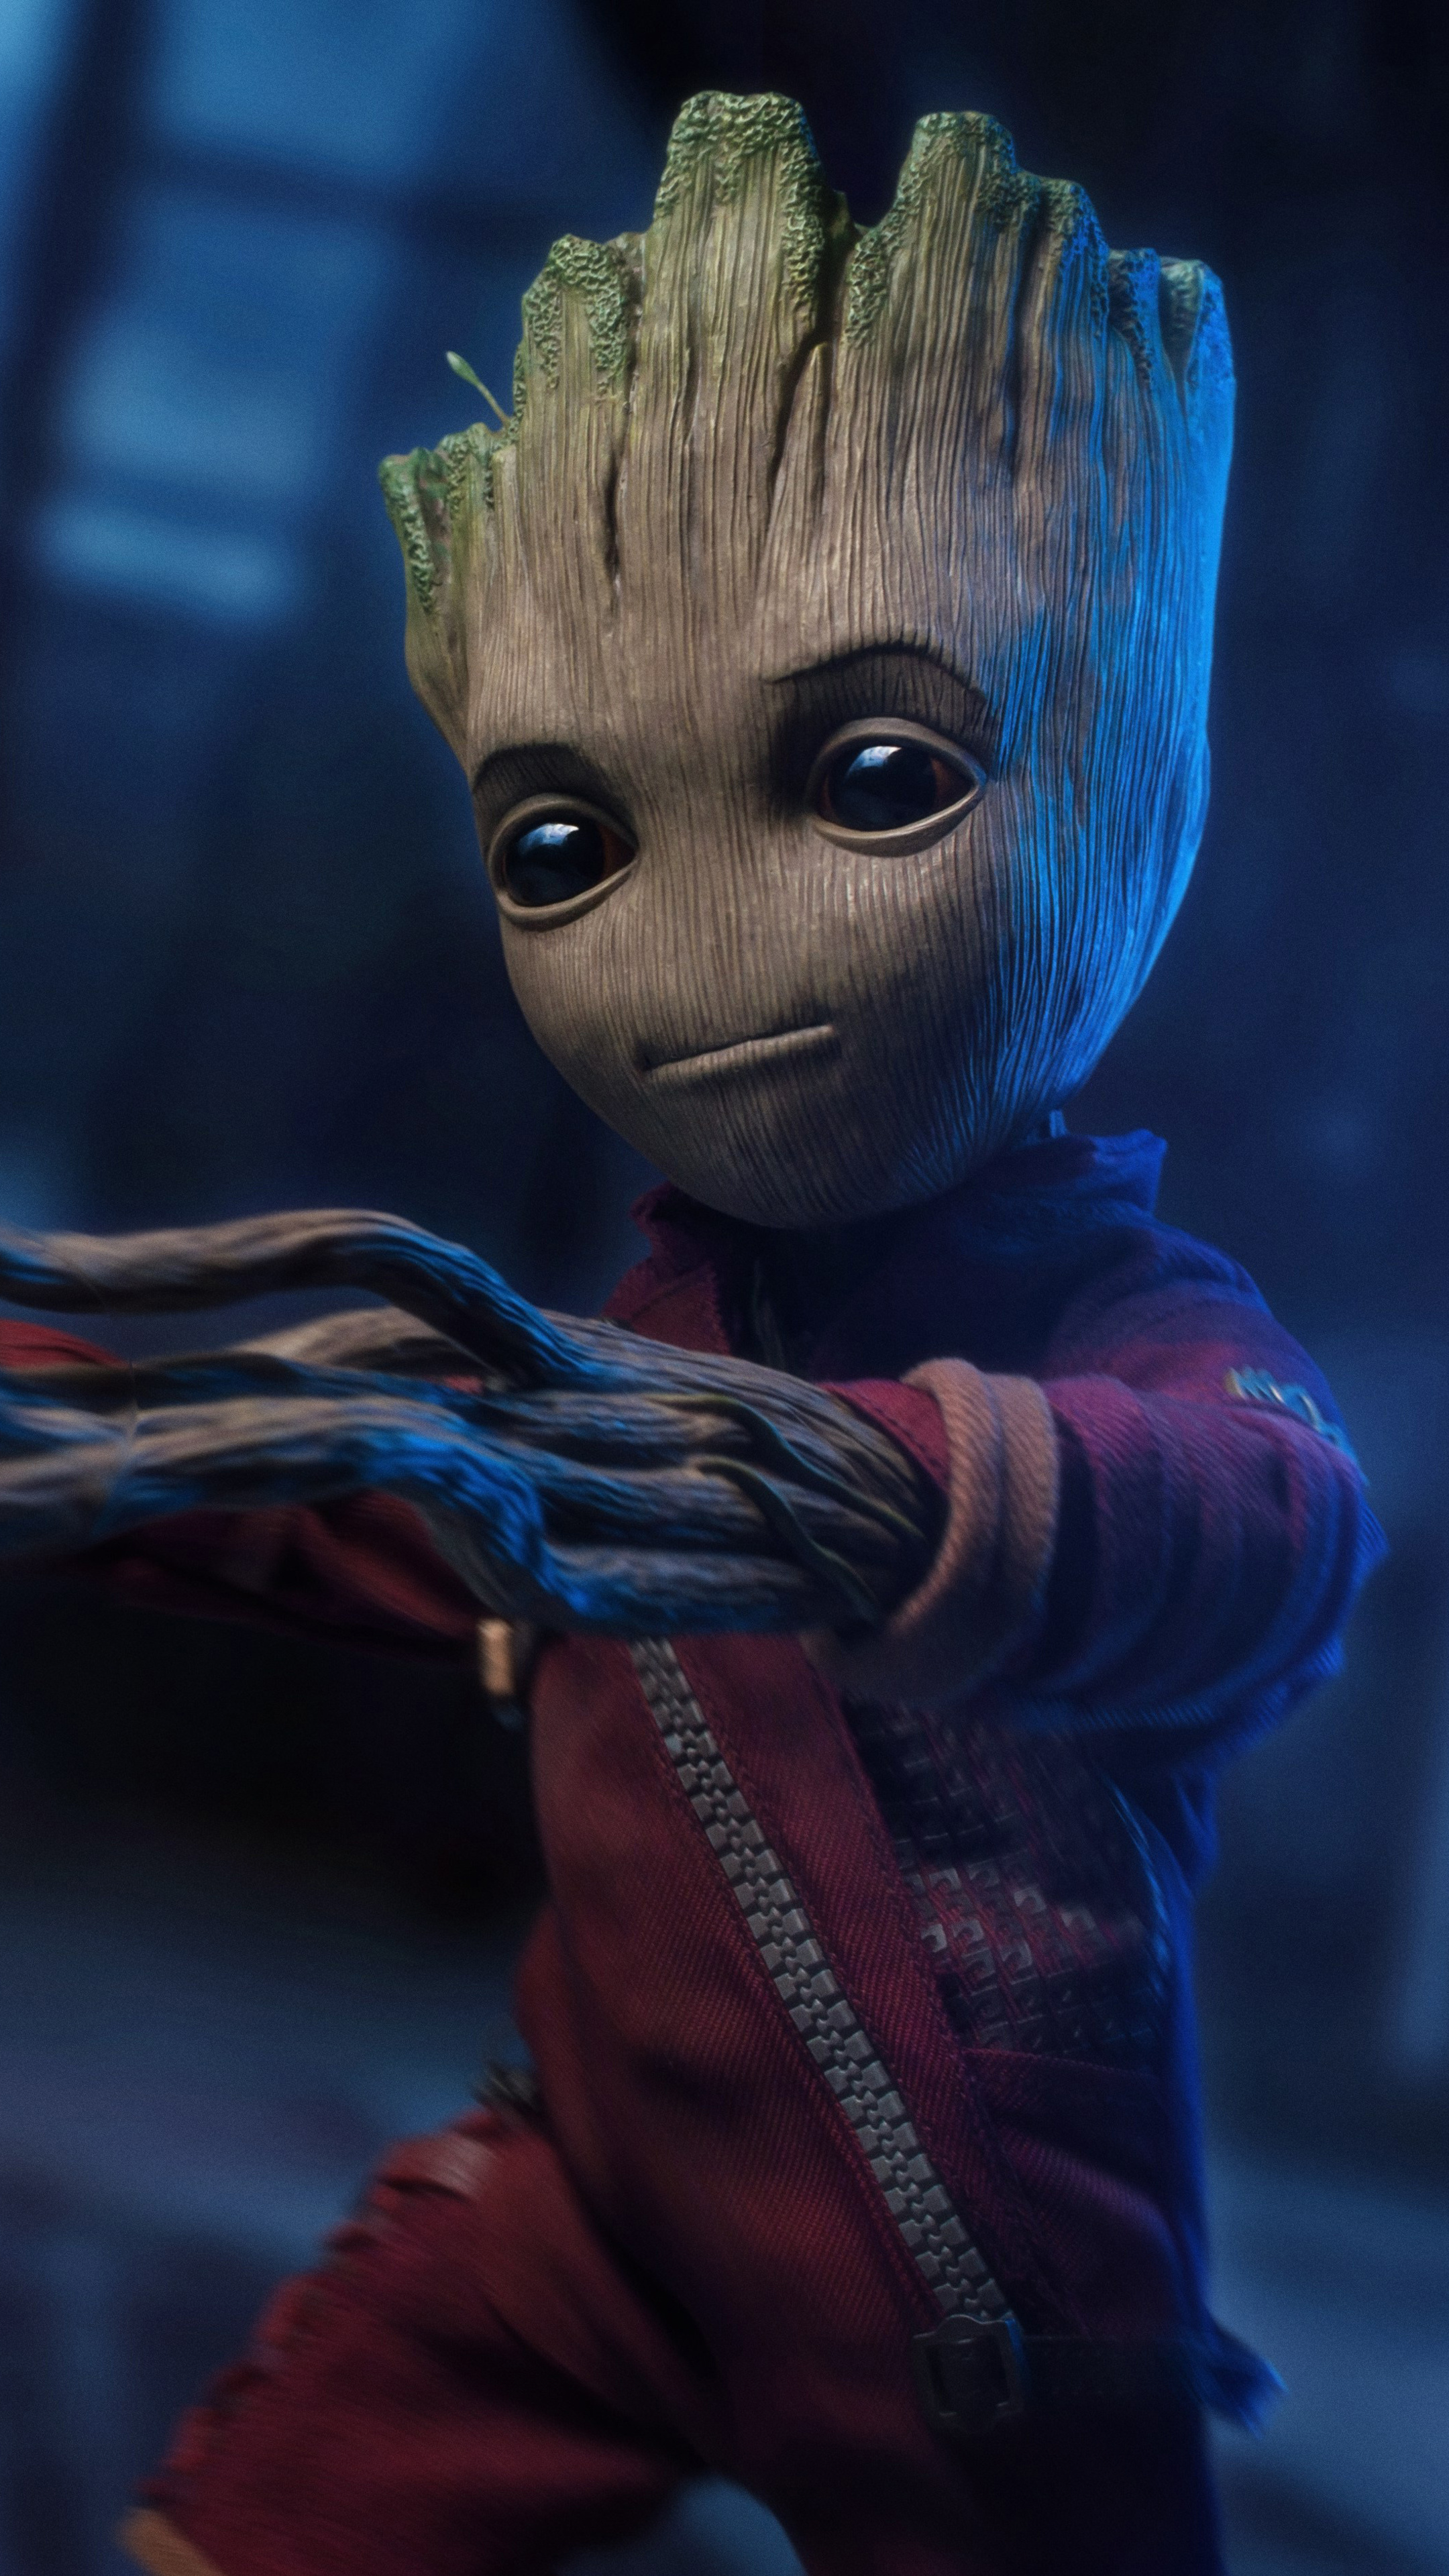 Baby Groot in 5K, 2018 Sony Xperia wallpaper, High-resolution images, Marvel superhero, 2160x3840 4K Phone